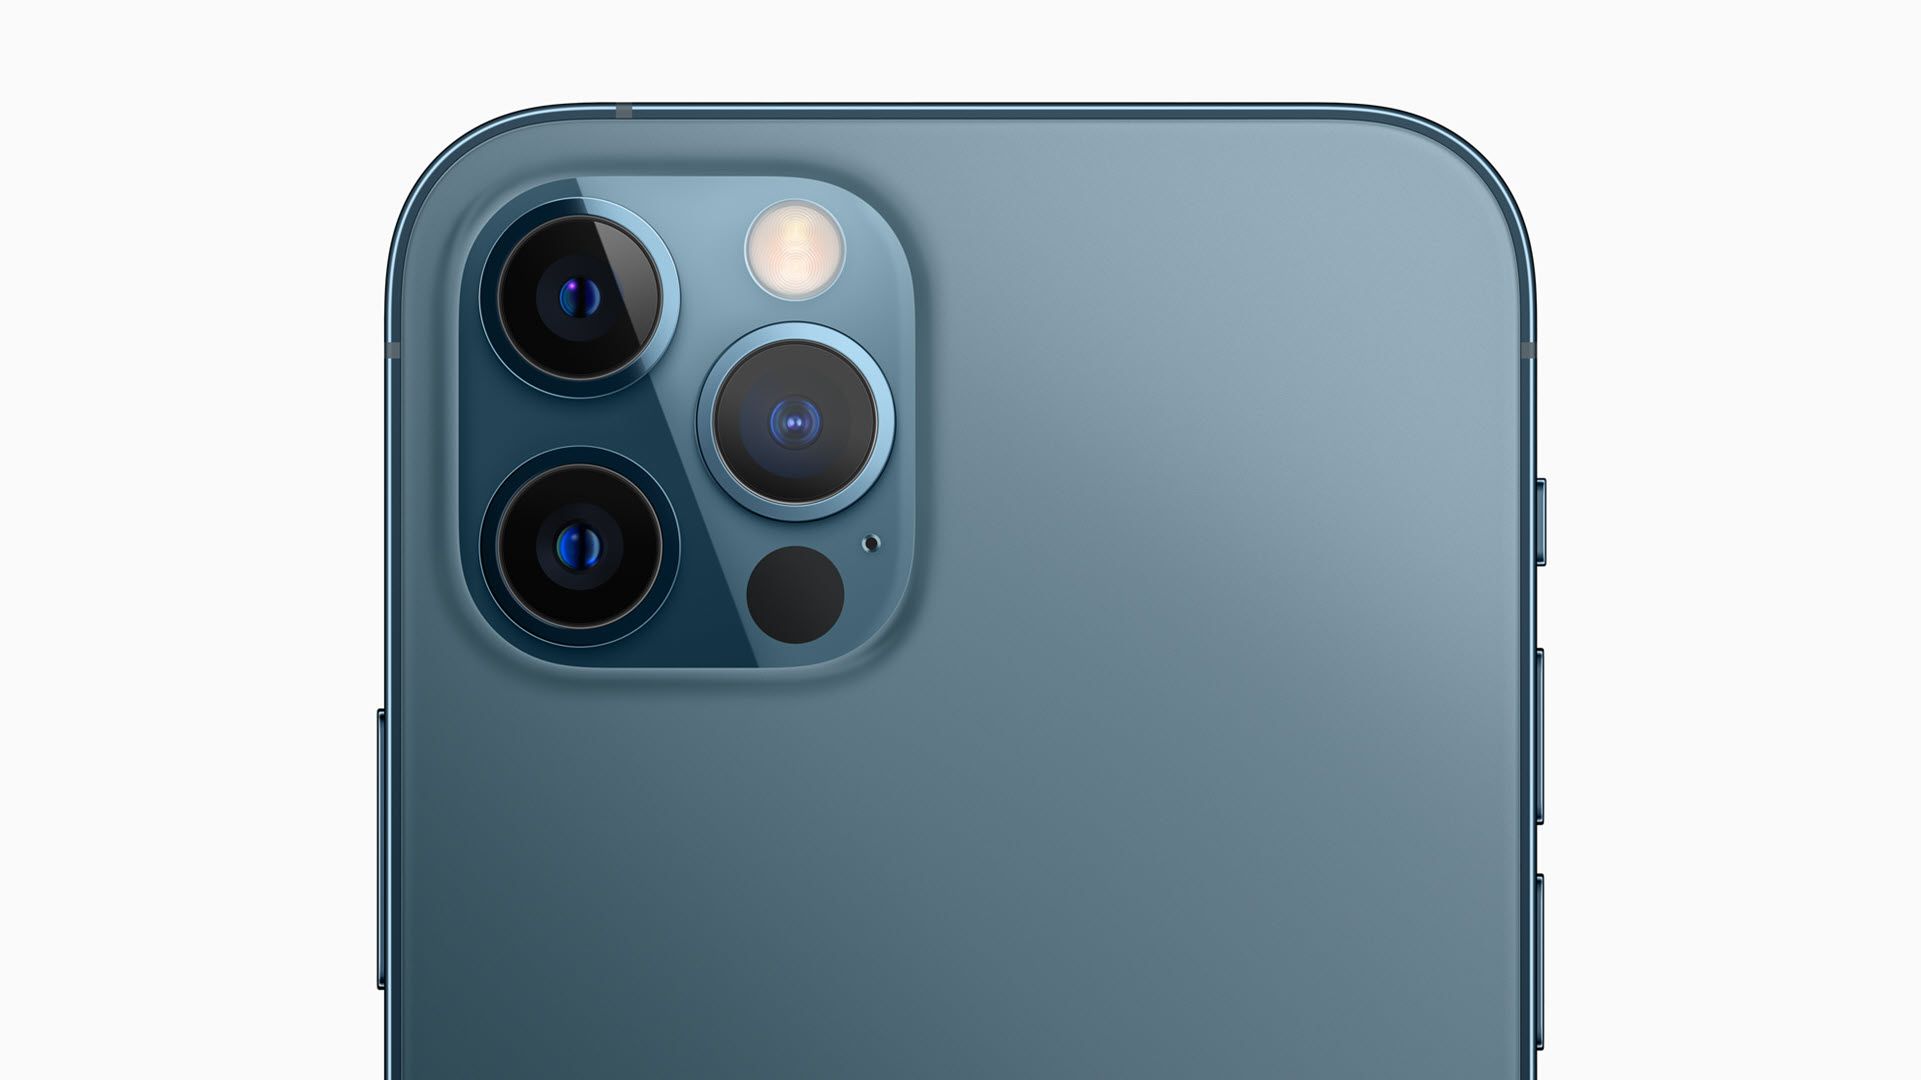 A Closeup of the iPhone 12 Pro camera system.